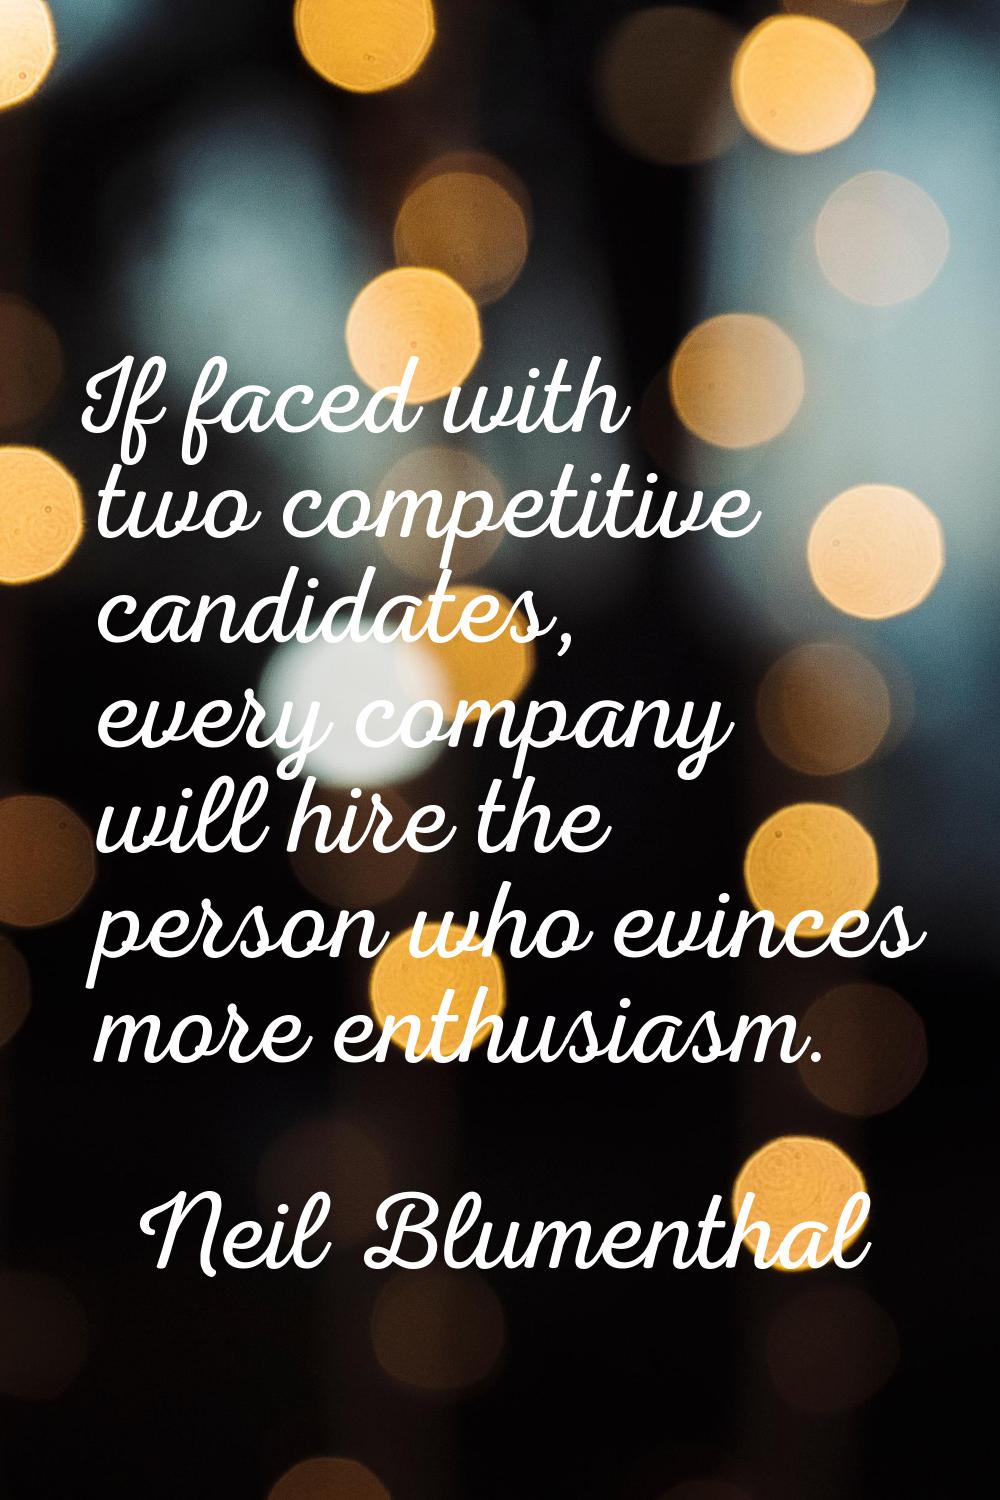 If faced with two competitive candidates, every company will hire the person who evinces more enthu